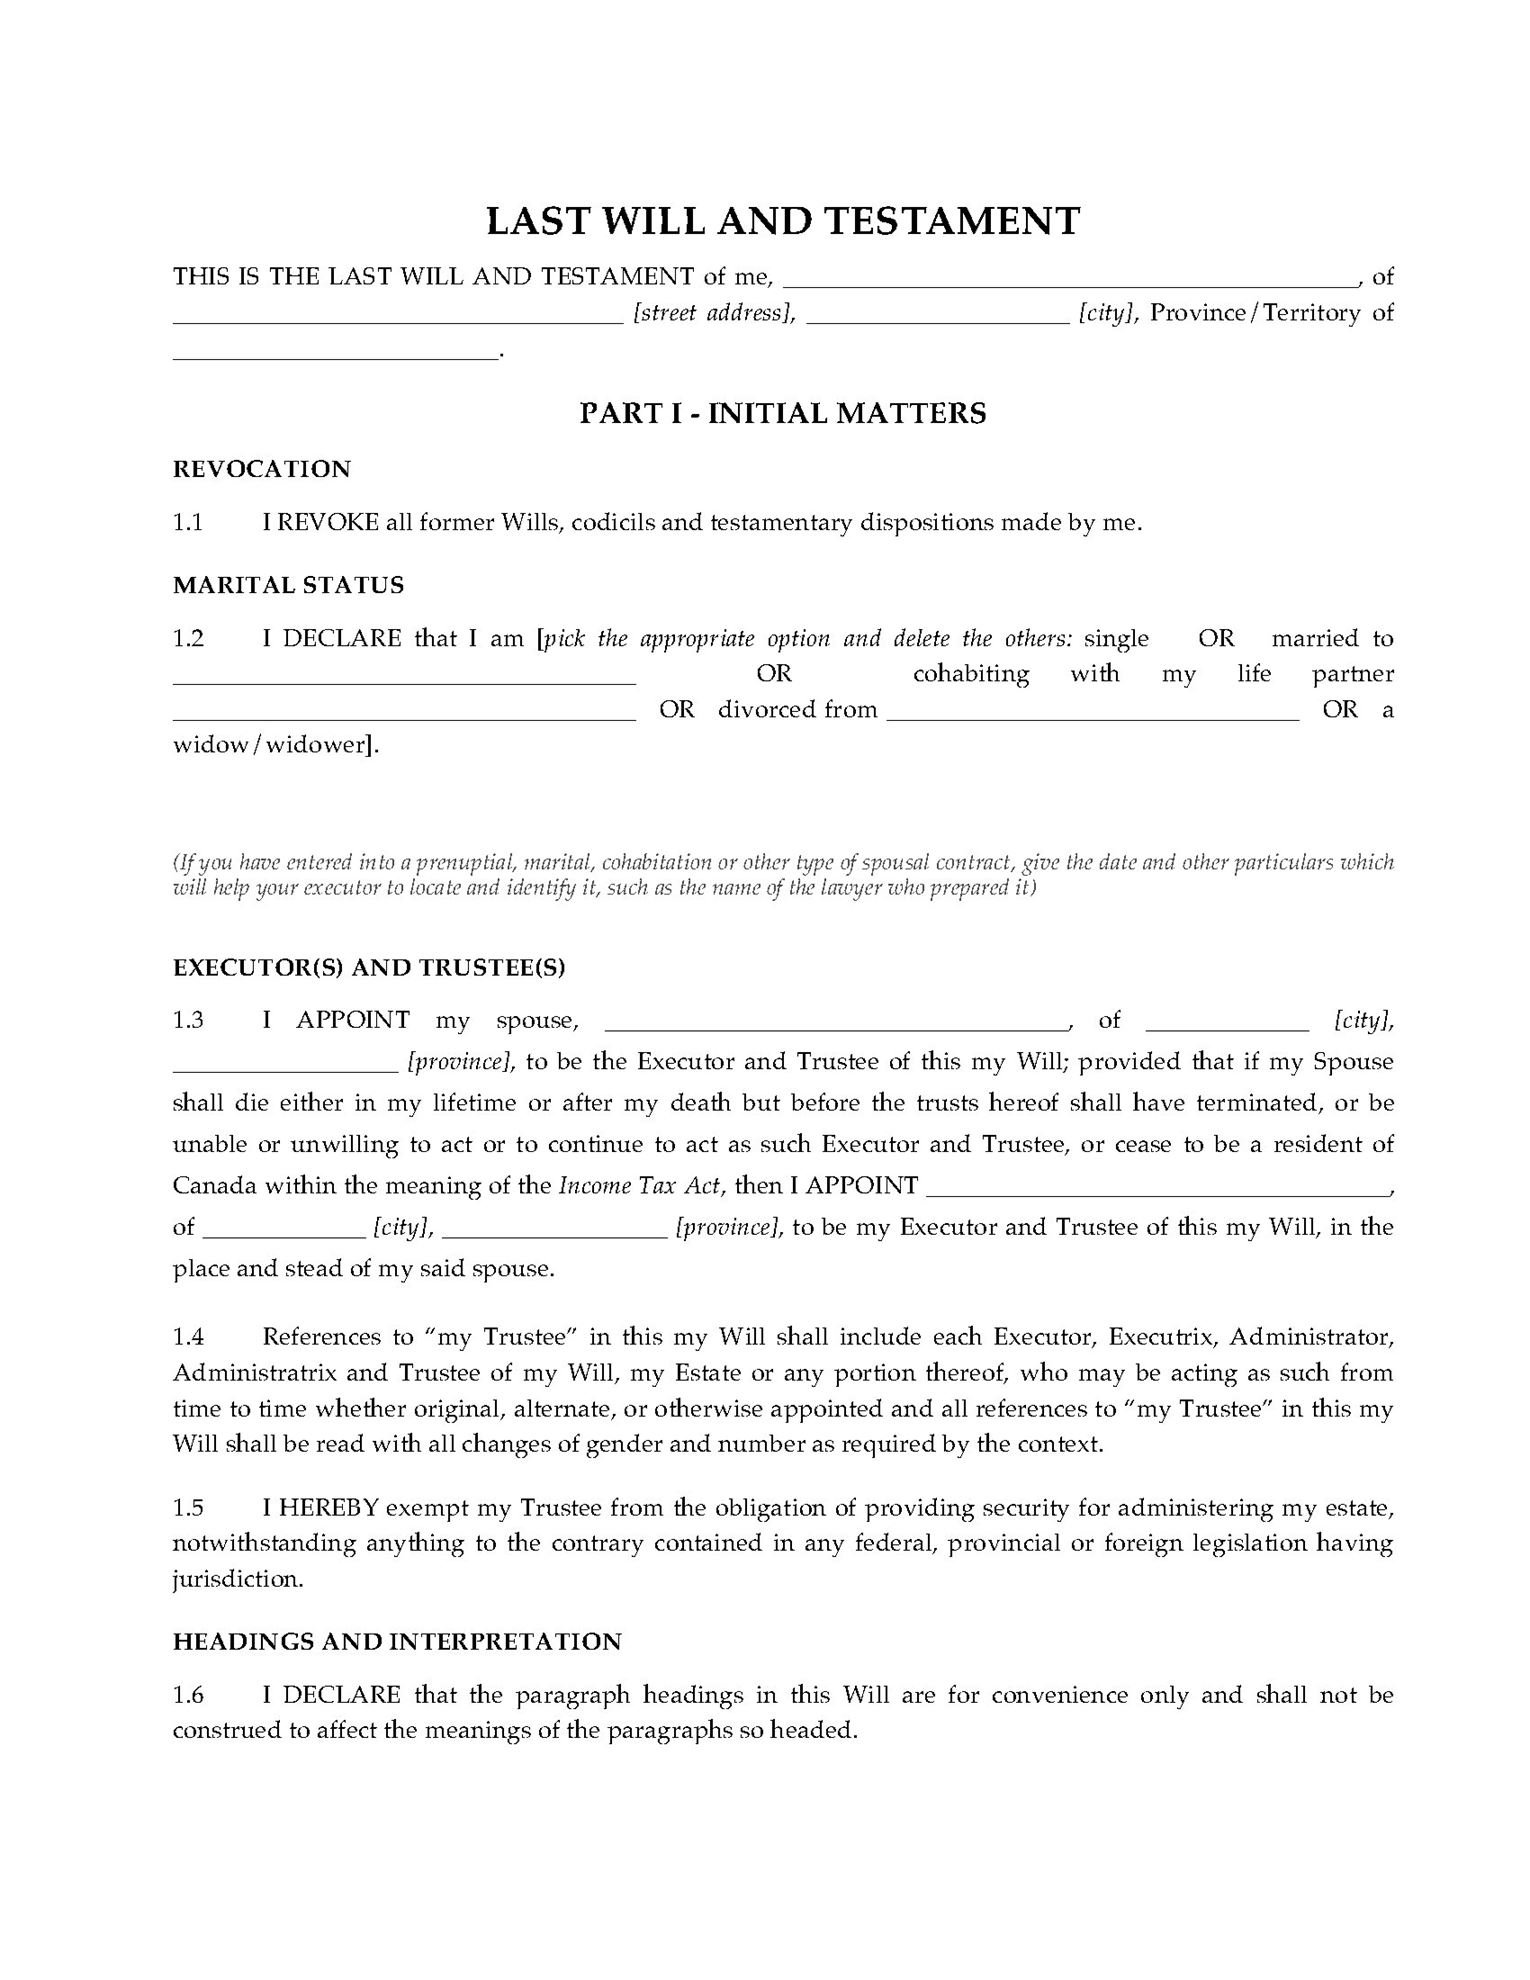 codicil-to-will-form-fillable-pdf-free-printable-legal-forms